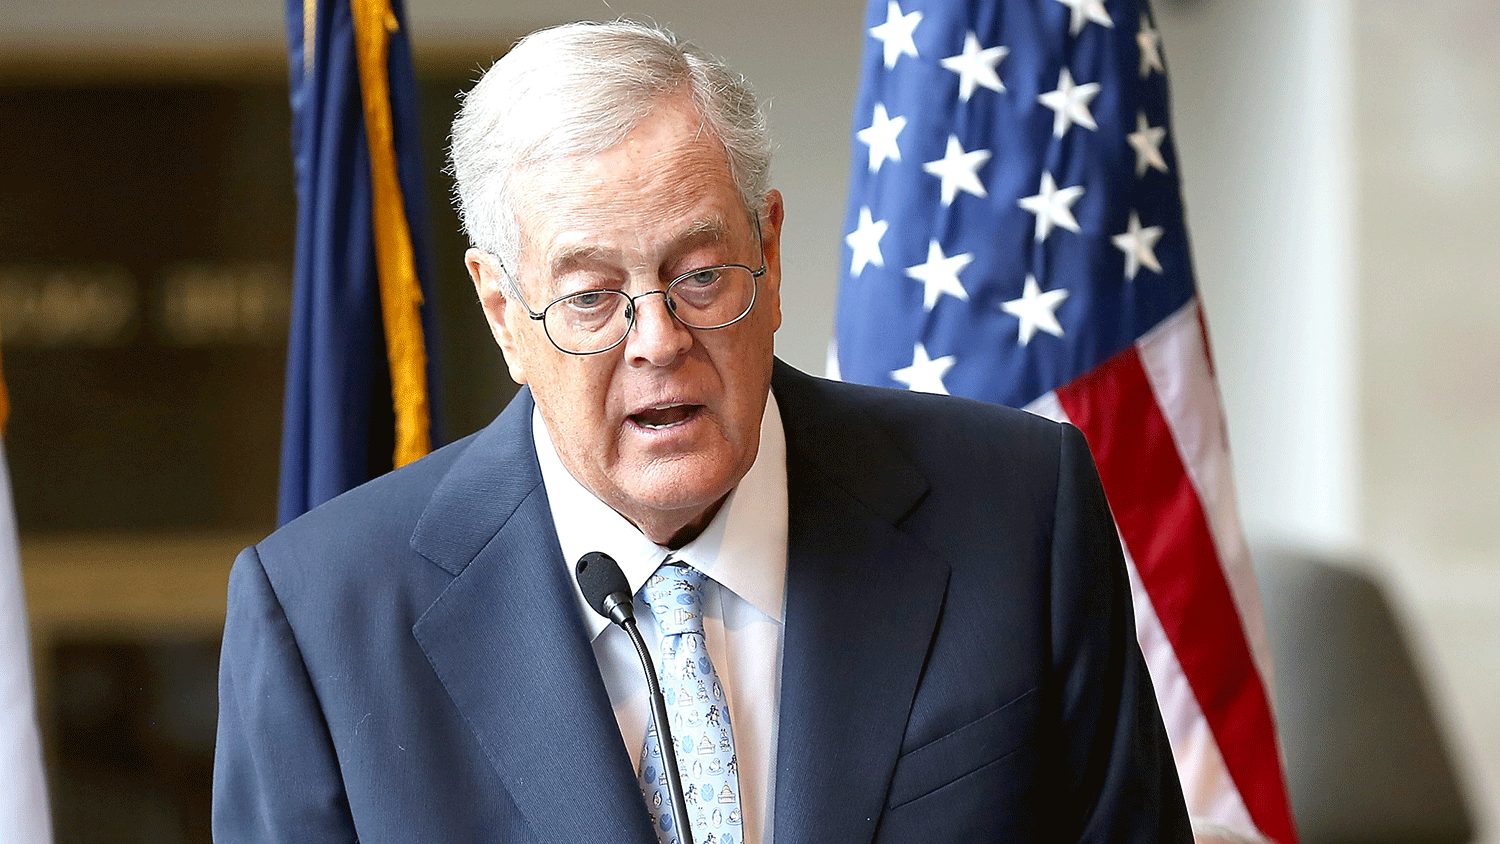 David H. Koch speaks at the unveiling of the David H. Koch Plaza at the Metropolitan Museum of Art on September 9, 2014 in New York City.
